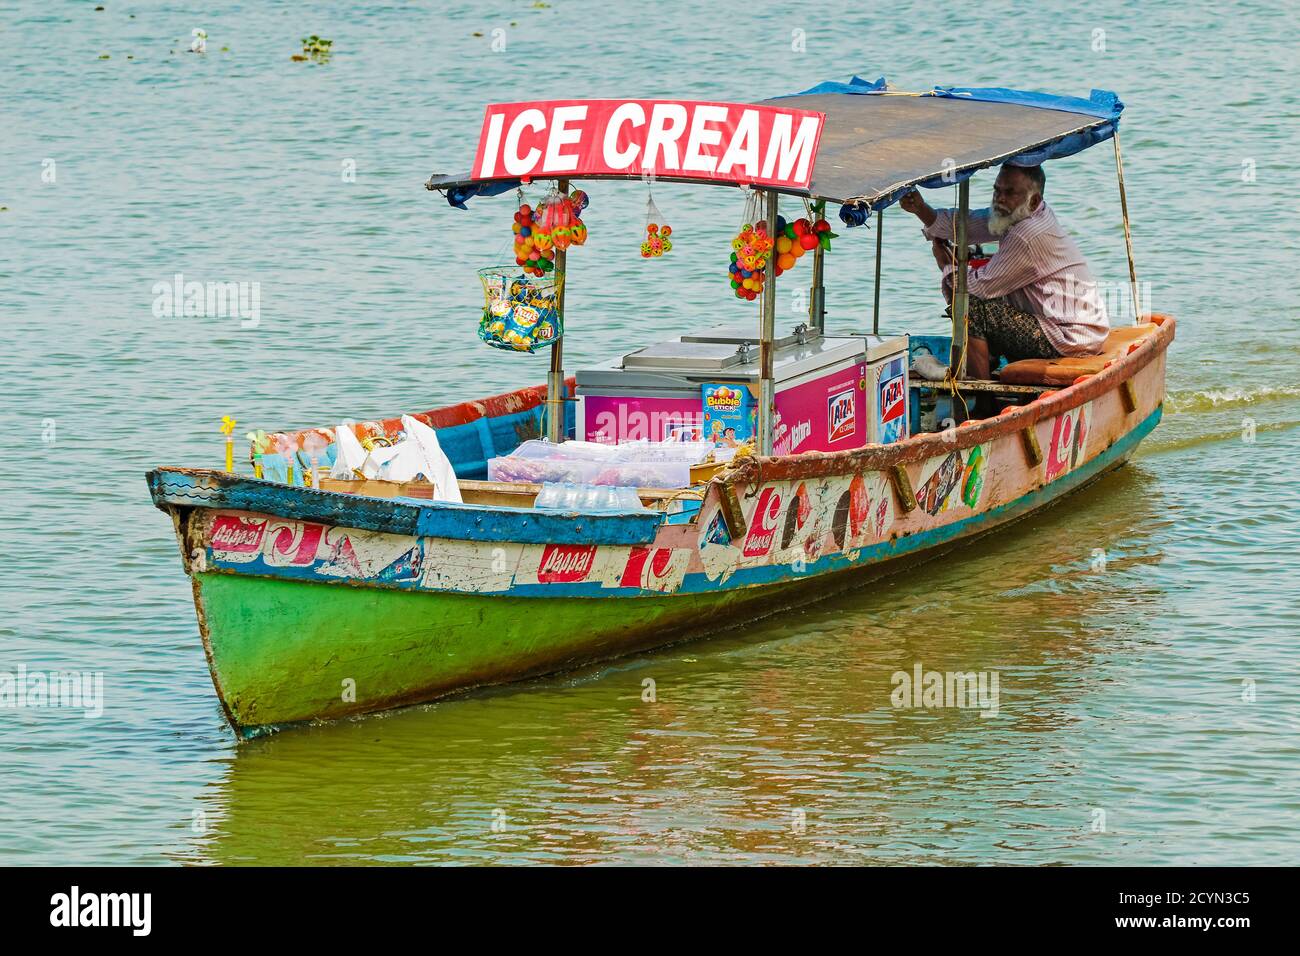 Man selling ice cream from boat on Lake Vembanad on the backwaters that are popular for houseboat cruises; Alappuzha (Alleppey), Kerala, India Stock Photo